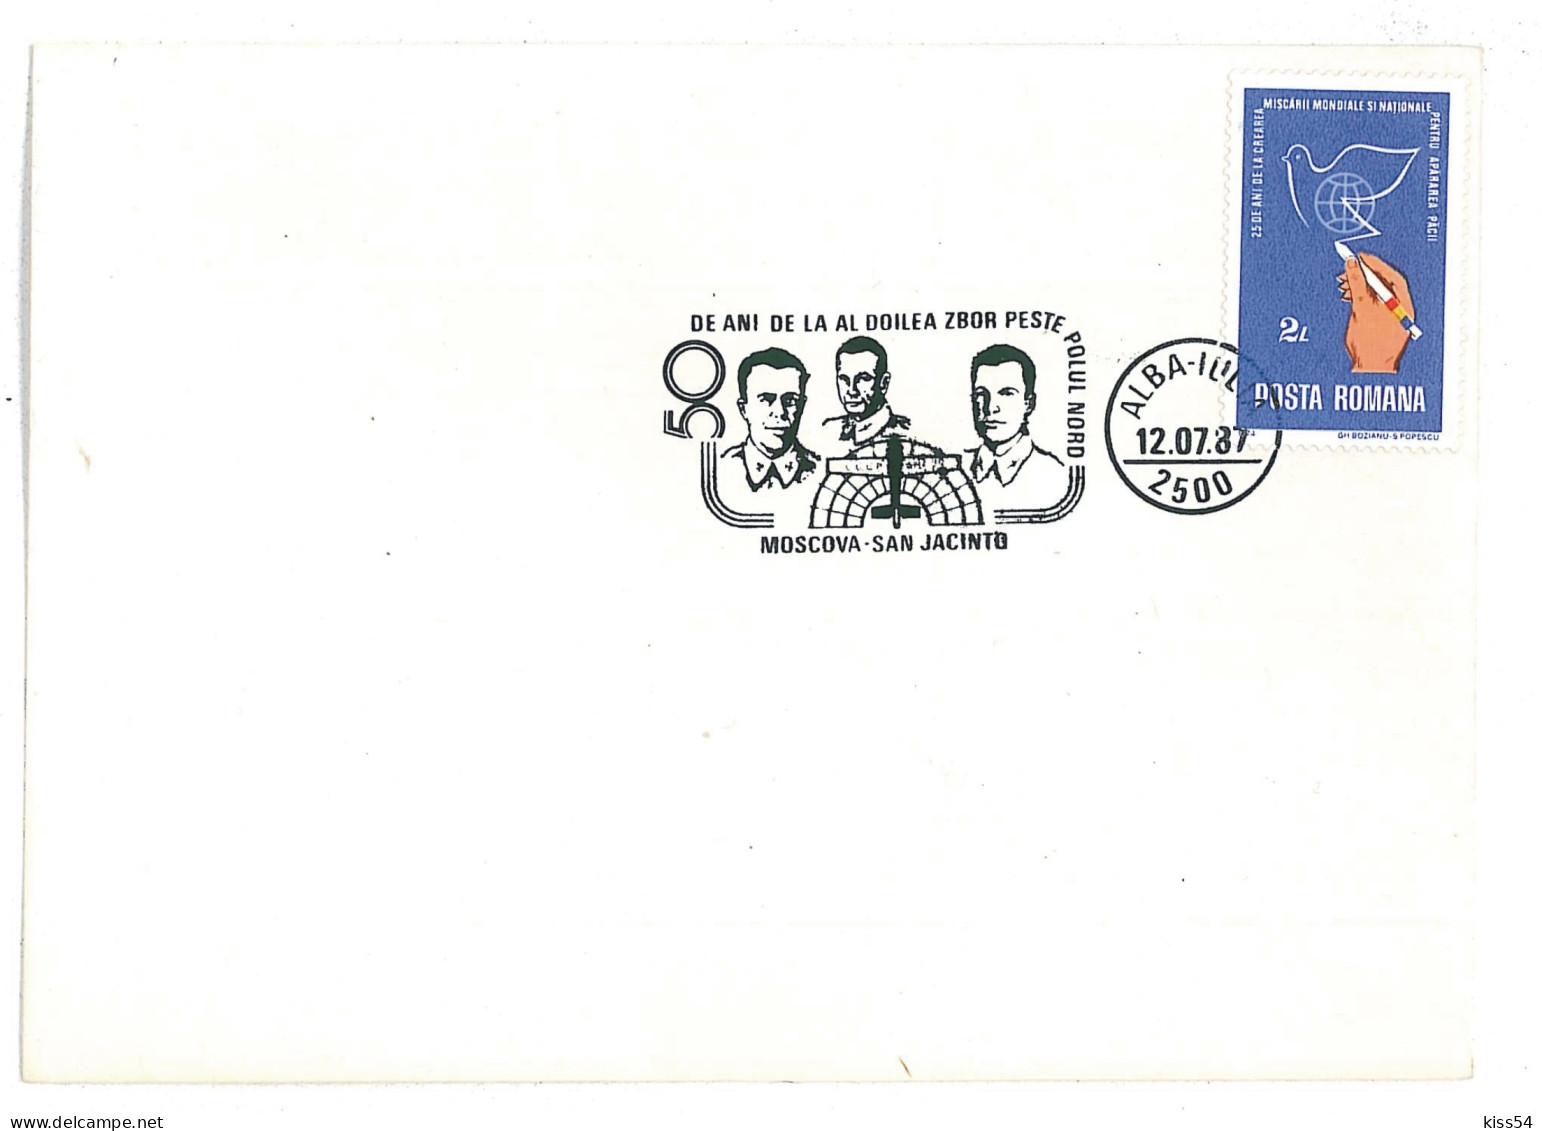 COV 08 - 2032 Polar Fly, Russia-USA, Romania - Cover - Used - 1987 - Poolvluchten